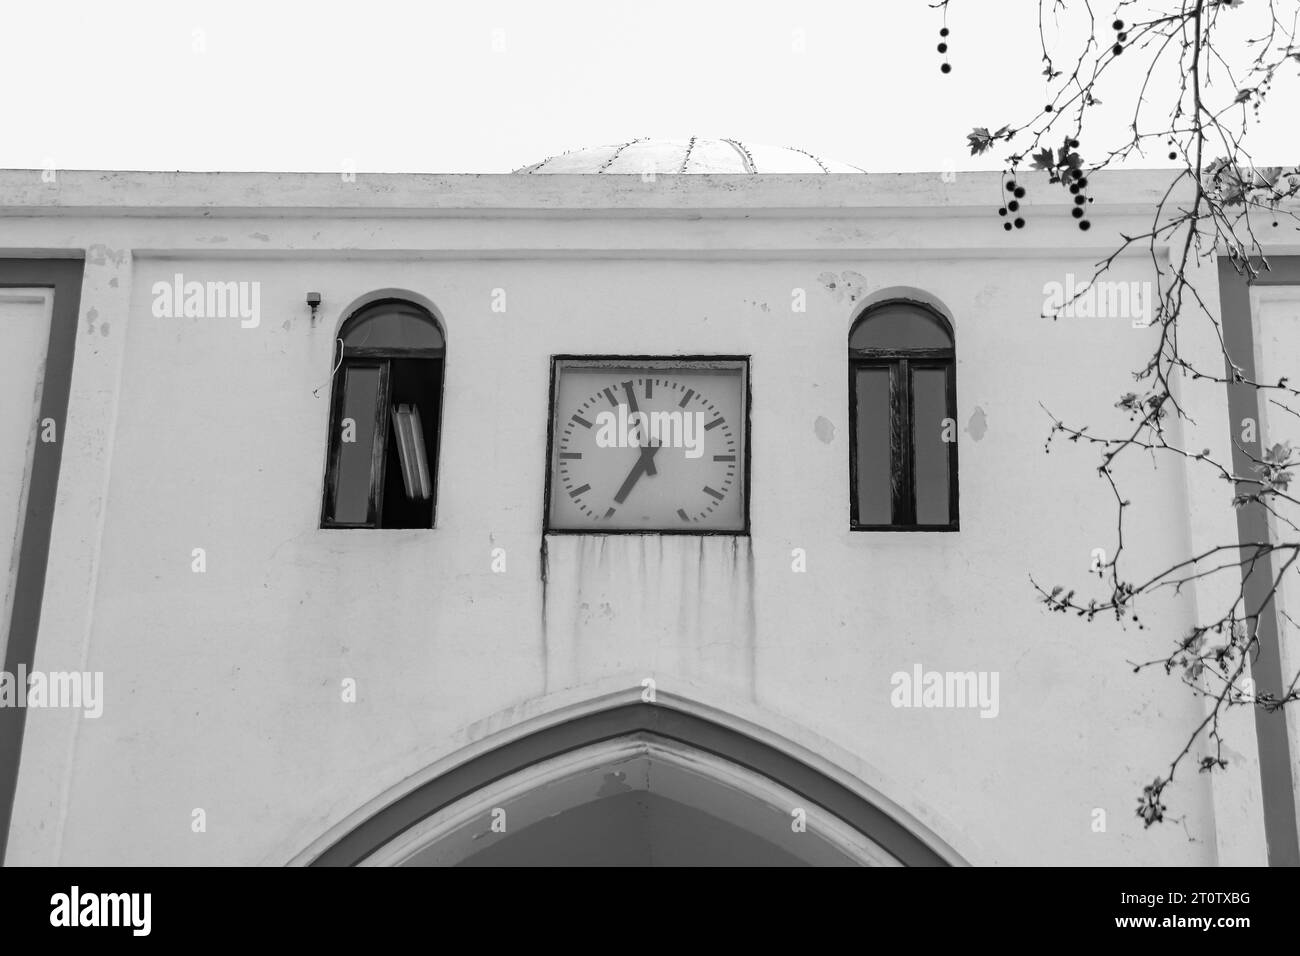 Gate wall of Rhodes city New Market (Nea Agora) with a clock showing the time of day in black and white Stock Photo